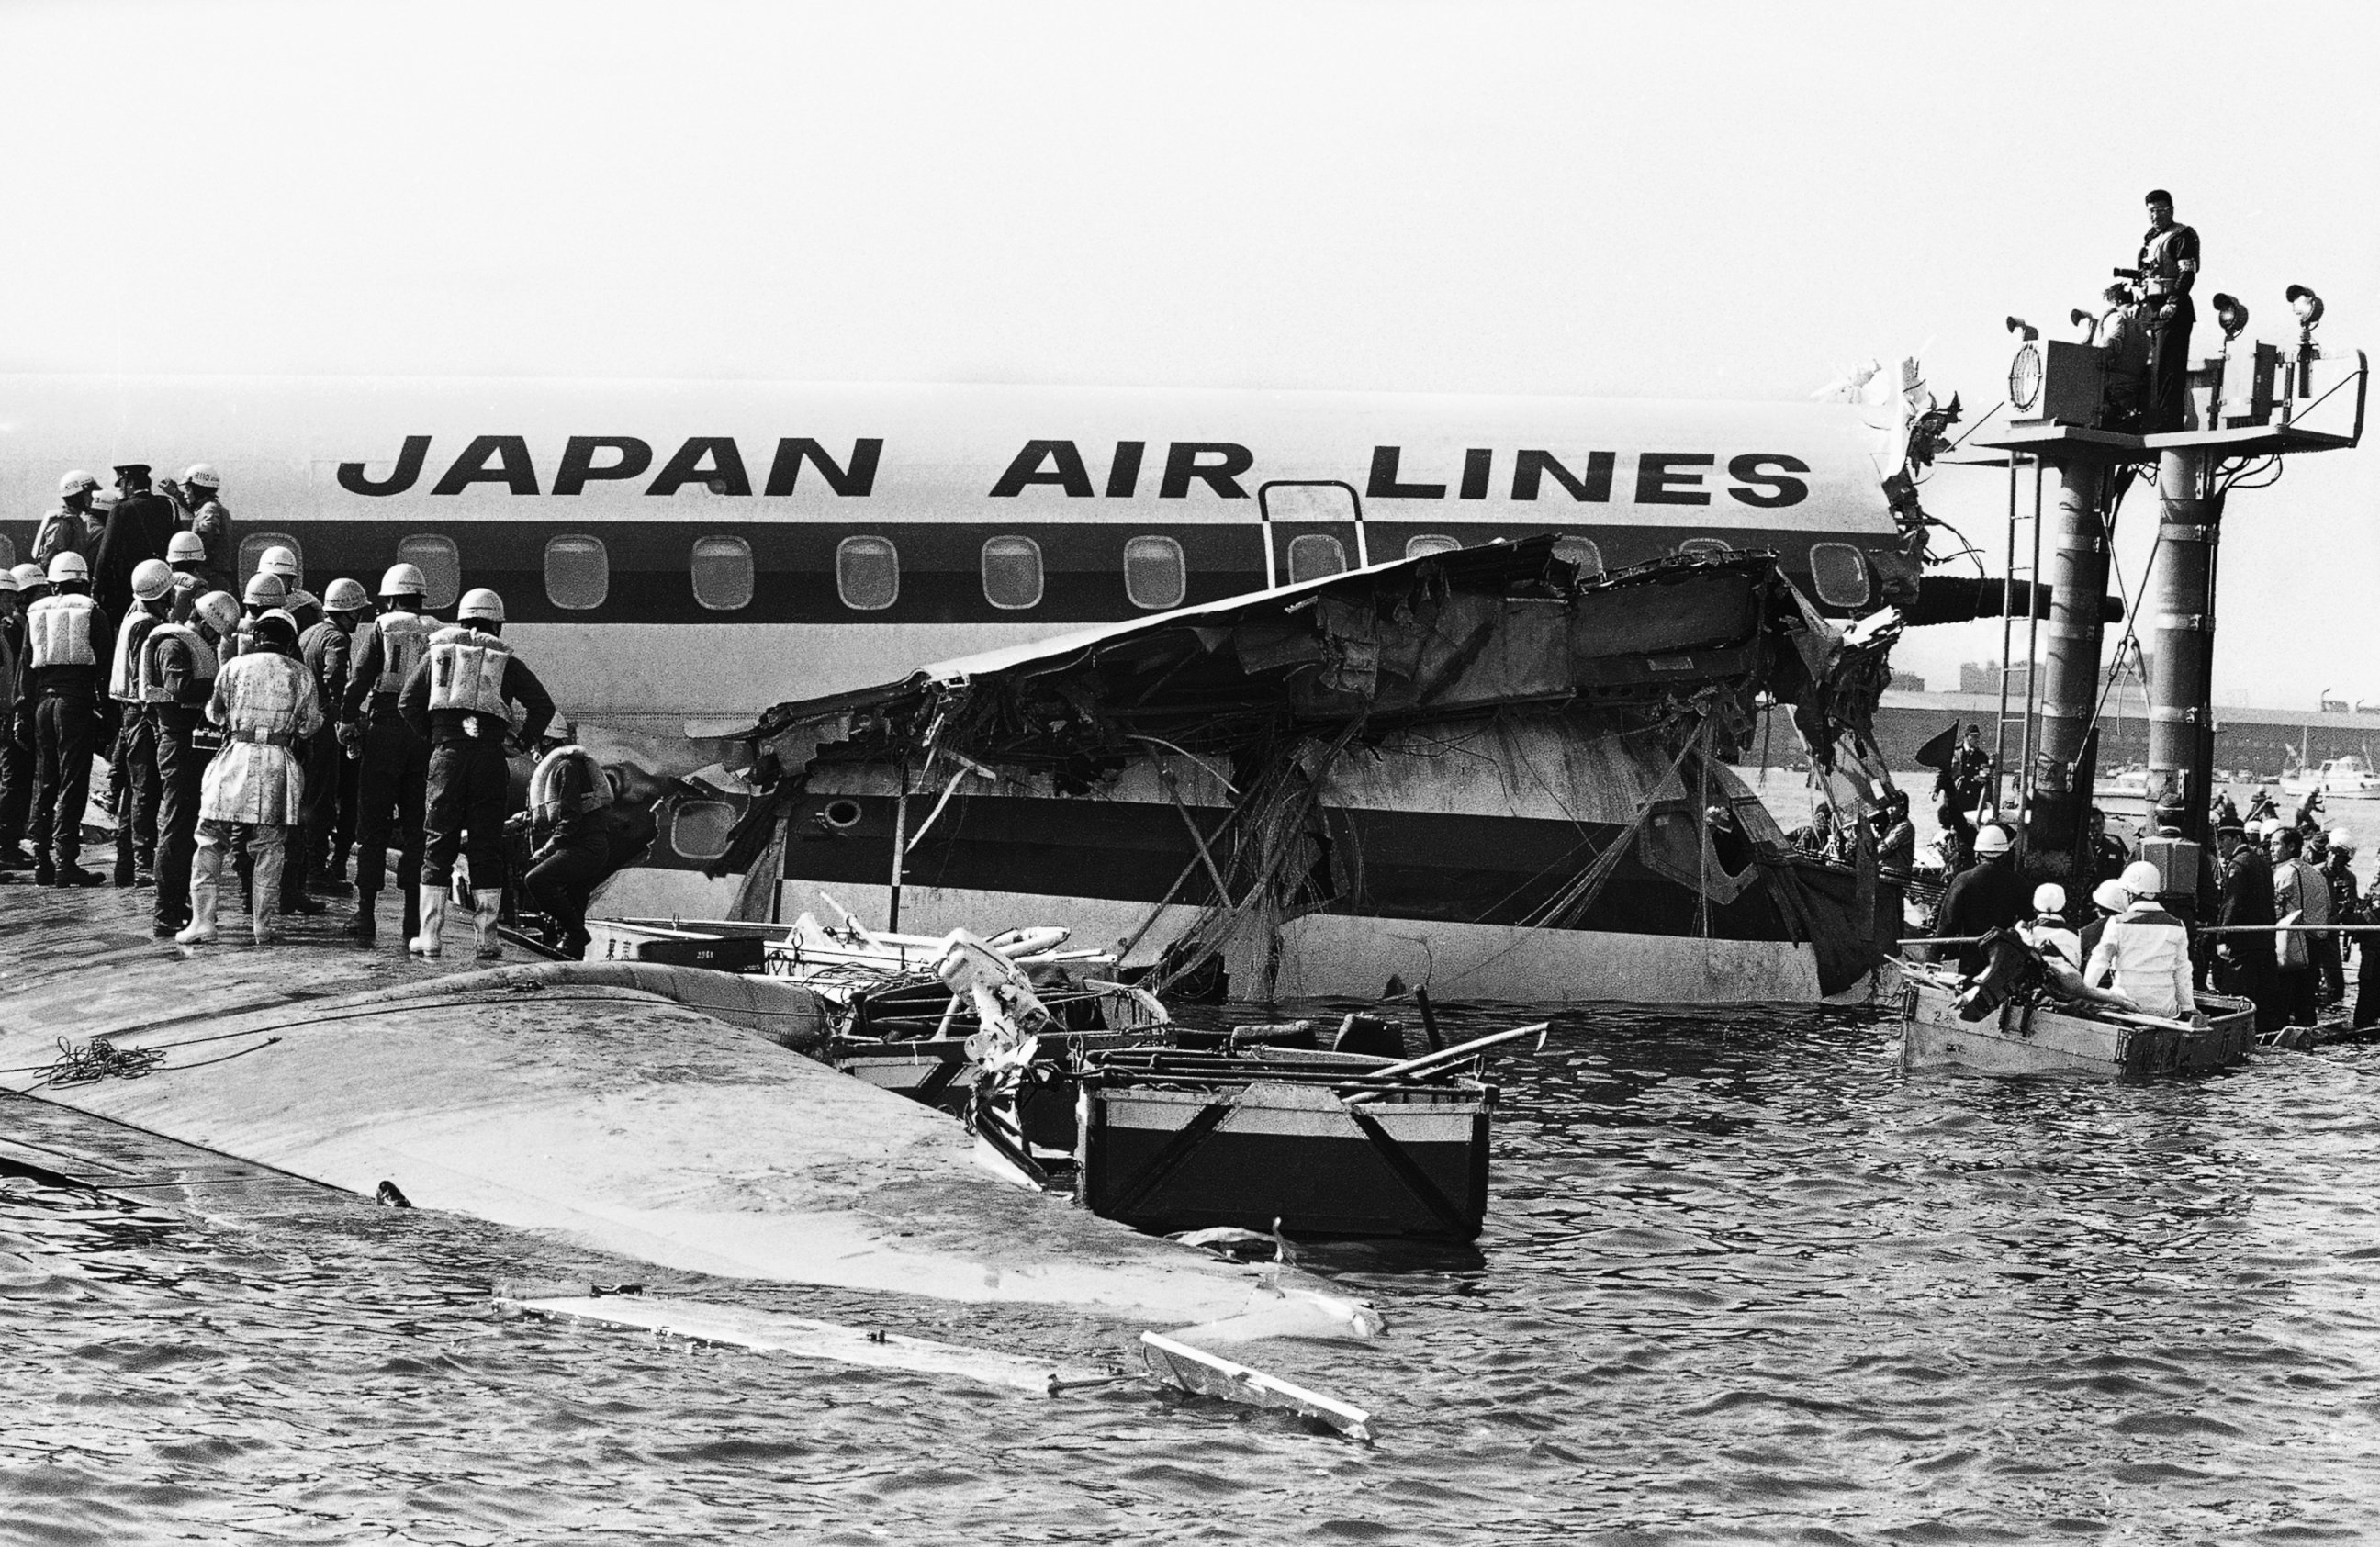 PHOTO: Nose of Japan Air Lines DC-8 jetliner is visible below and inside main body of airliner which crashed in Tokyo Bay on Tuesday, Feb. 9, 1982, while making a landing approach. 